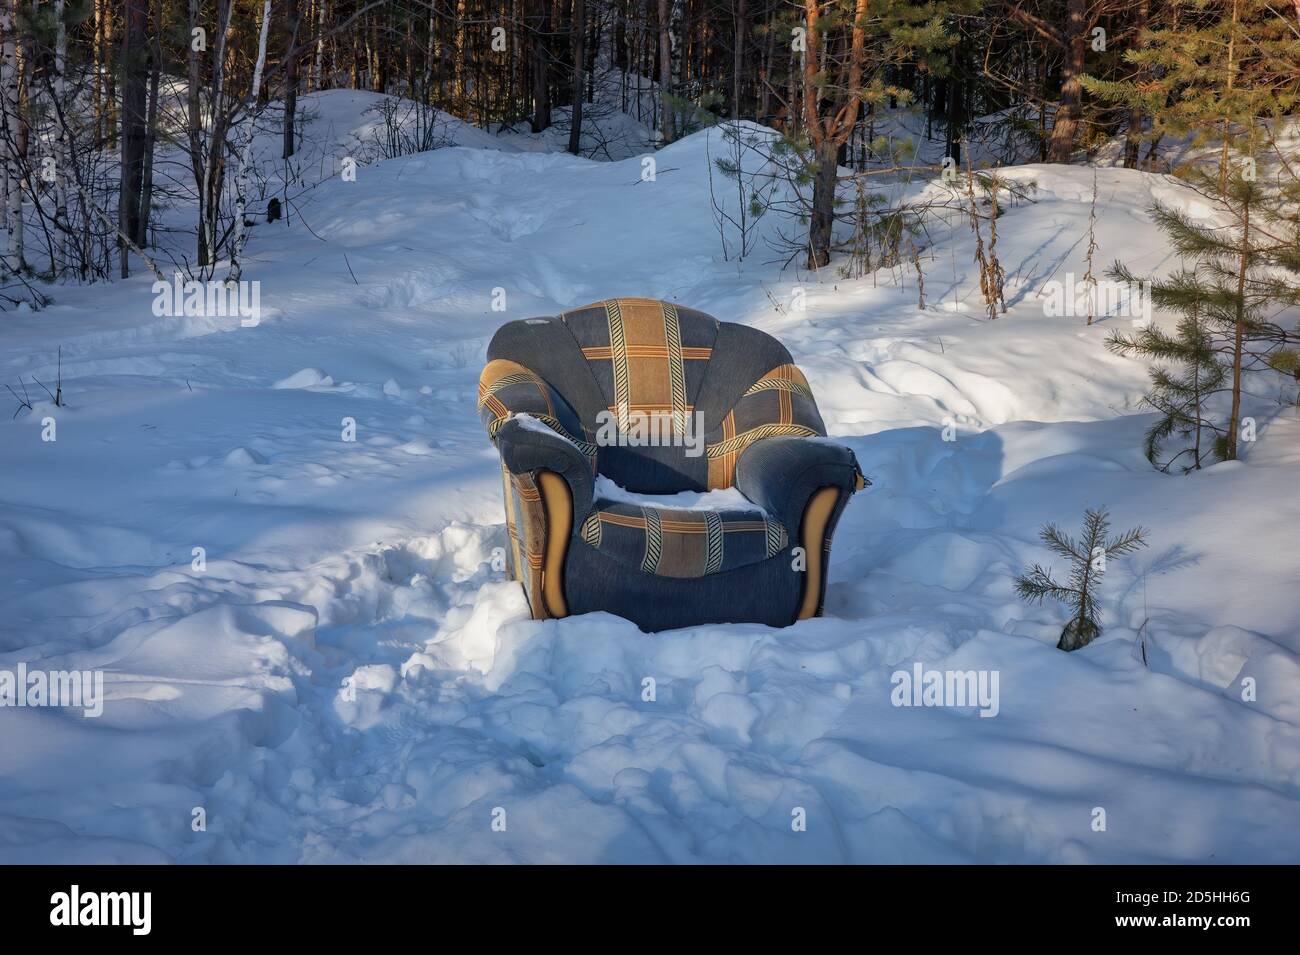 An easy chair stands in a snowy forest. Stock Photo